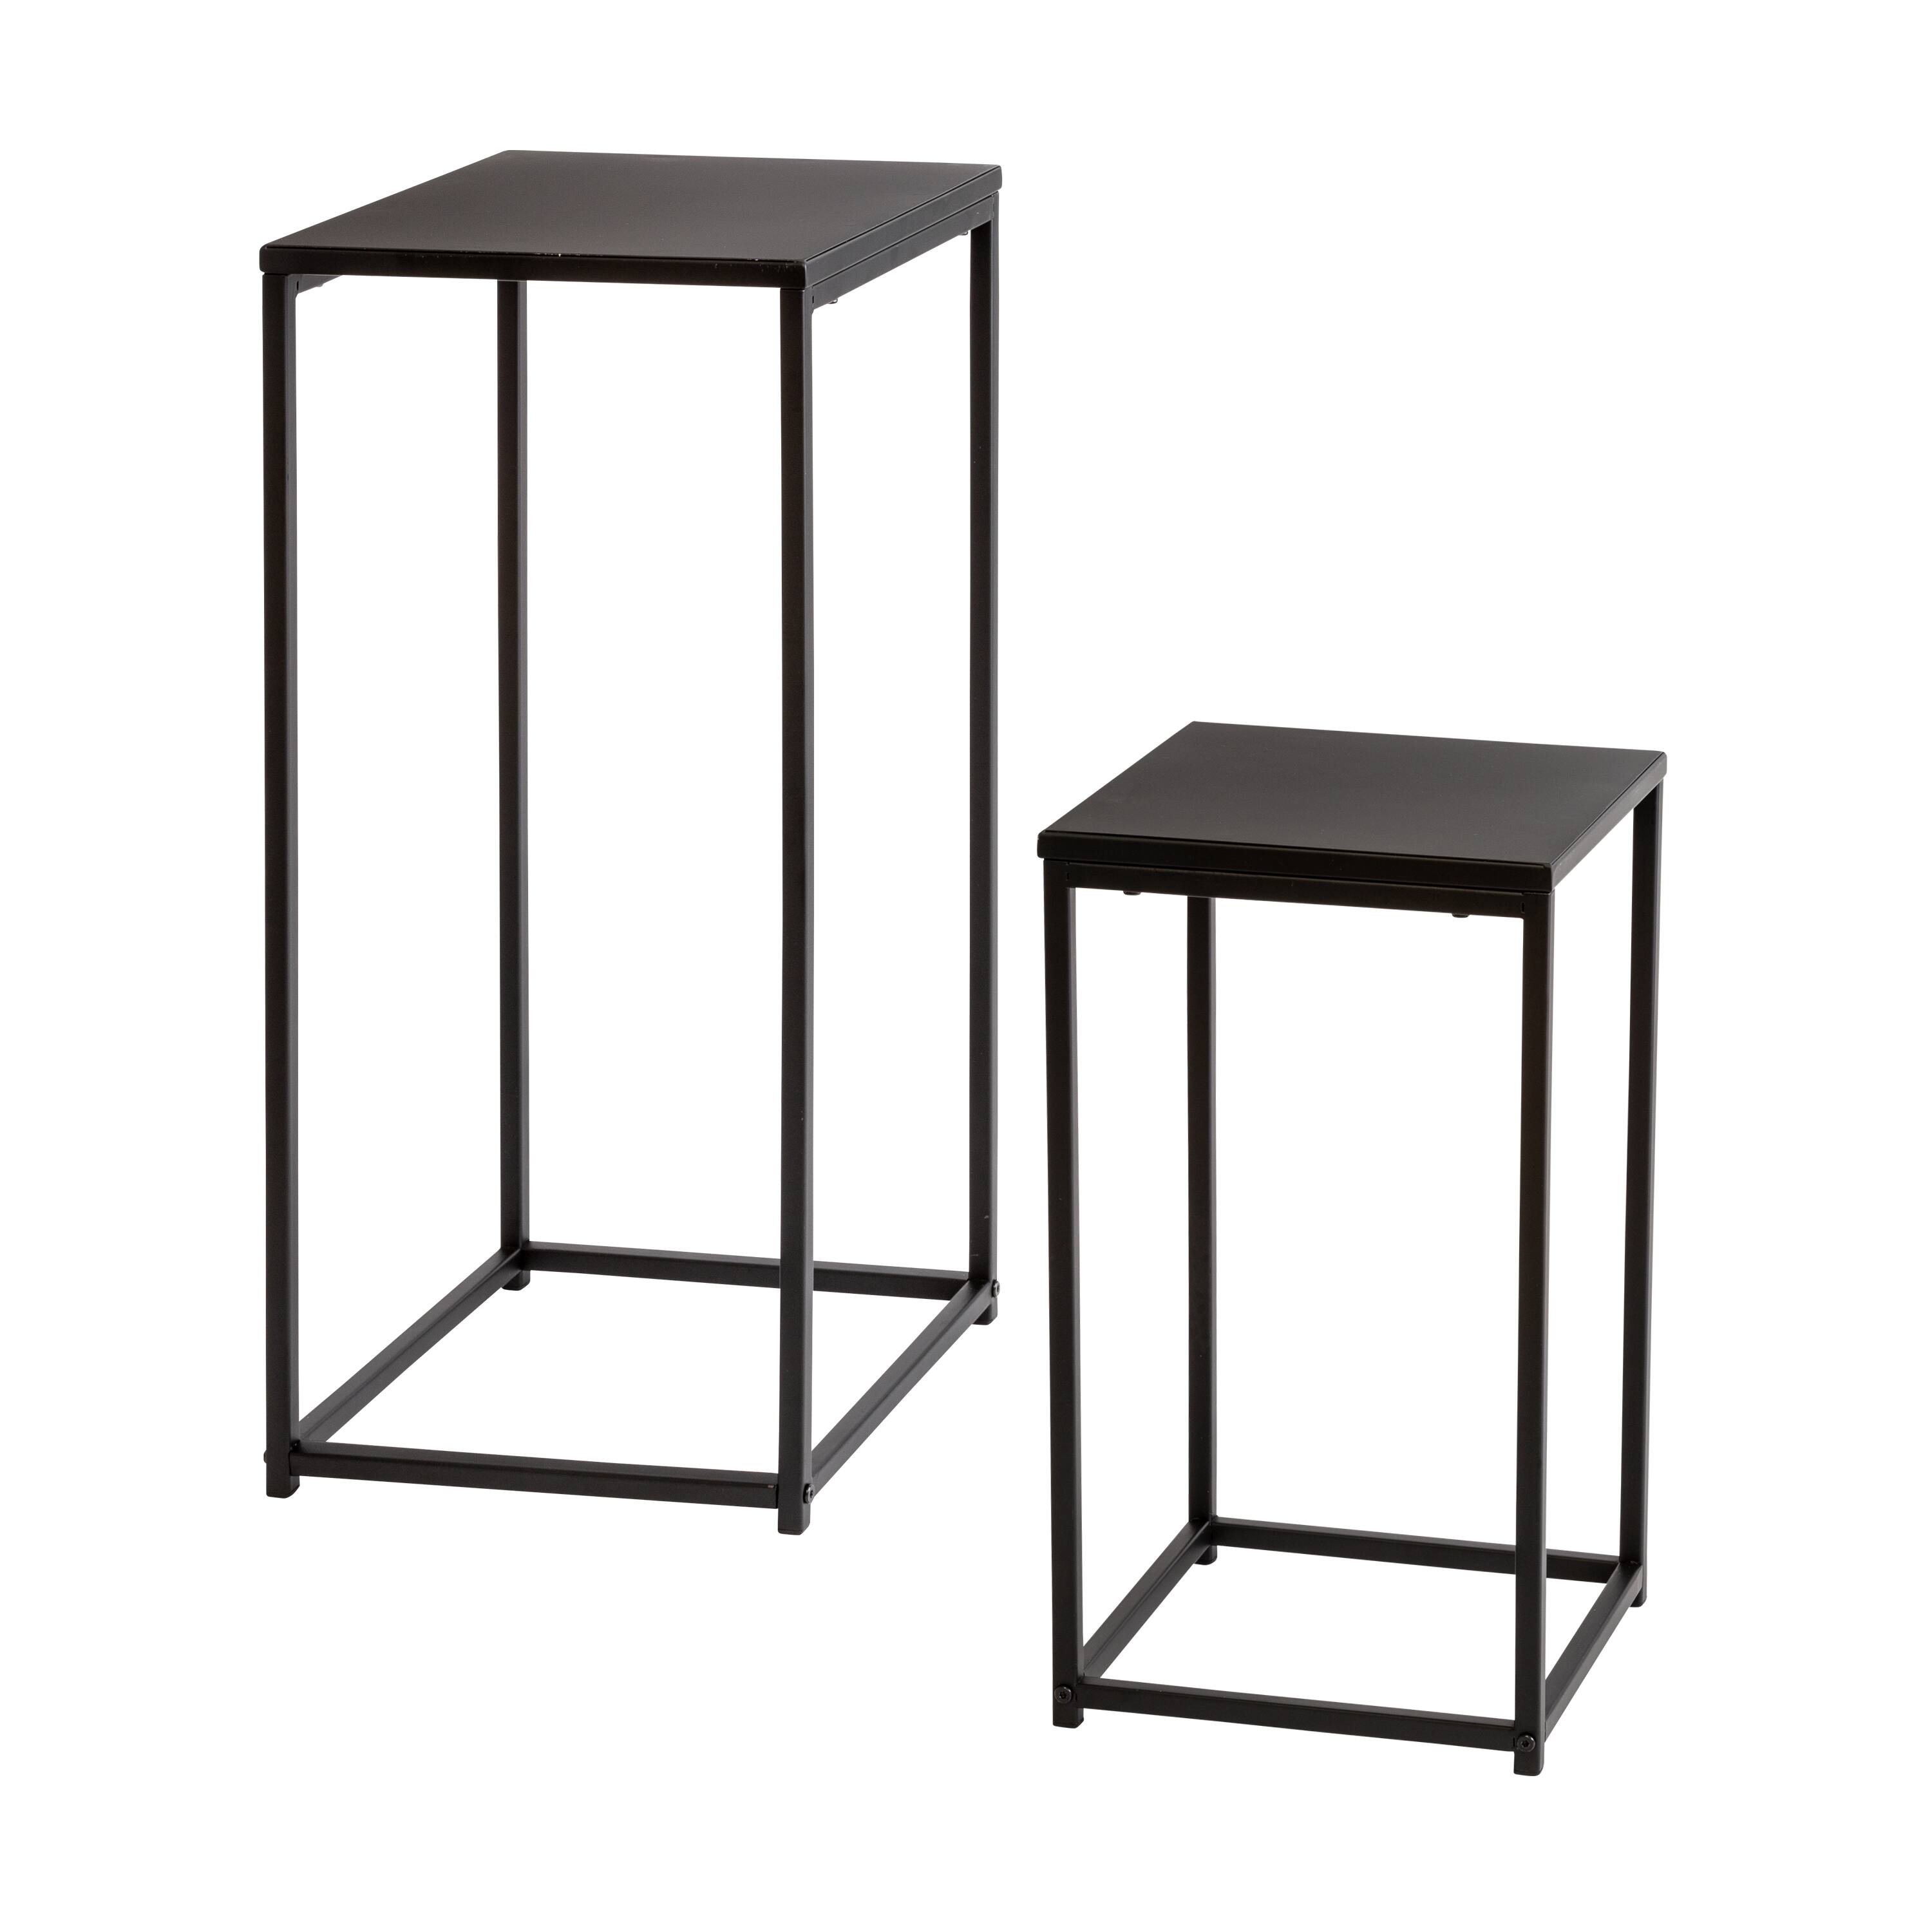 6 Packs: 2 ct. (12 total) Honey Can Do Square Black Side Tables Set